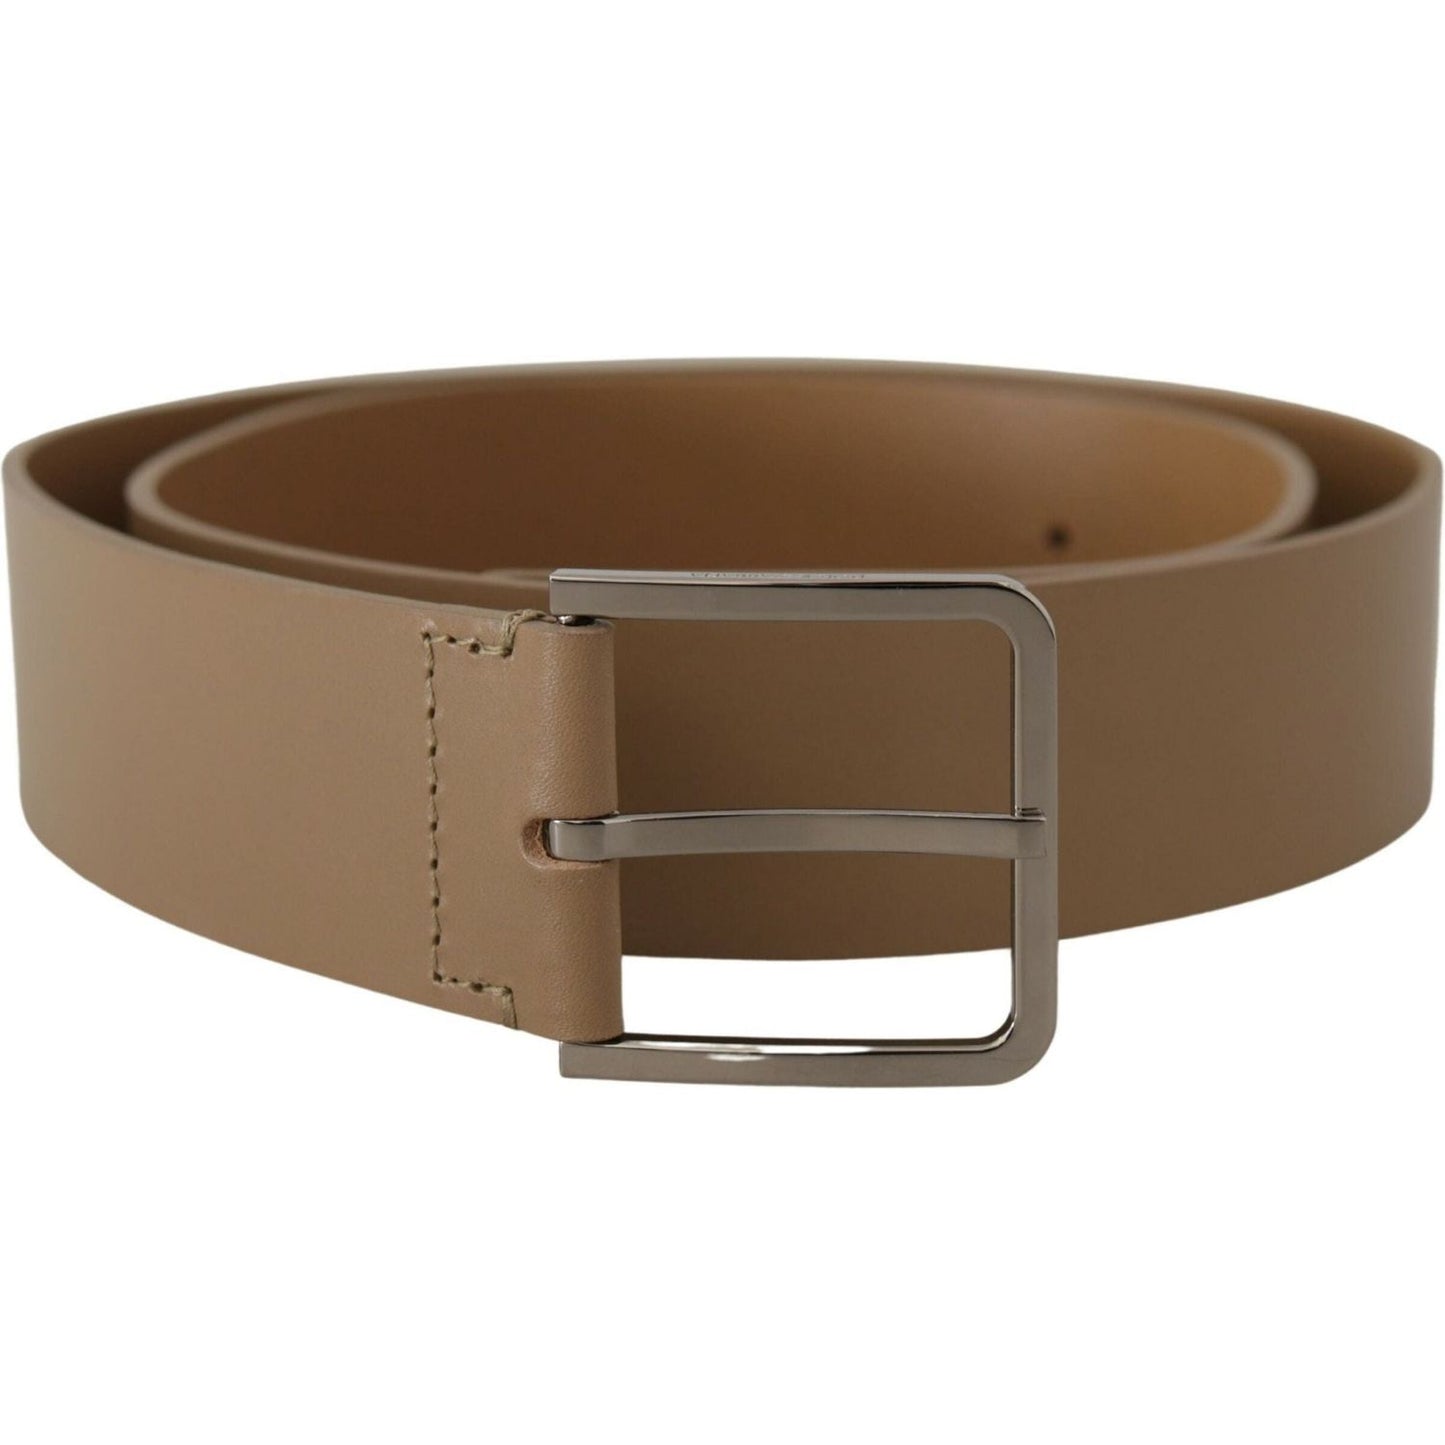 Beige Leather Statement Belt with Silver Buckle